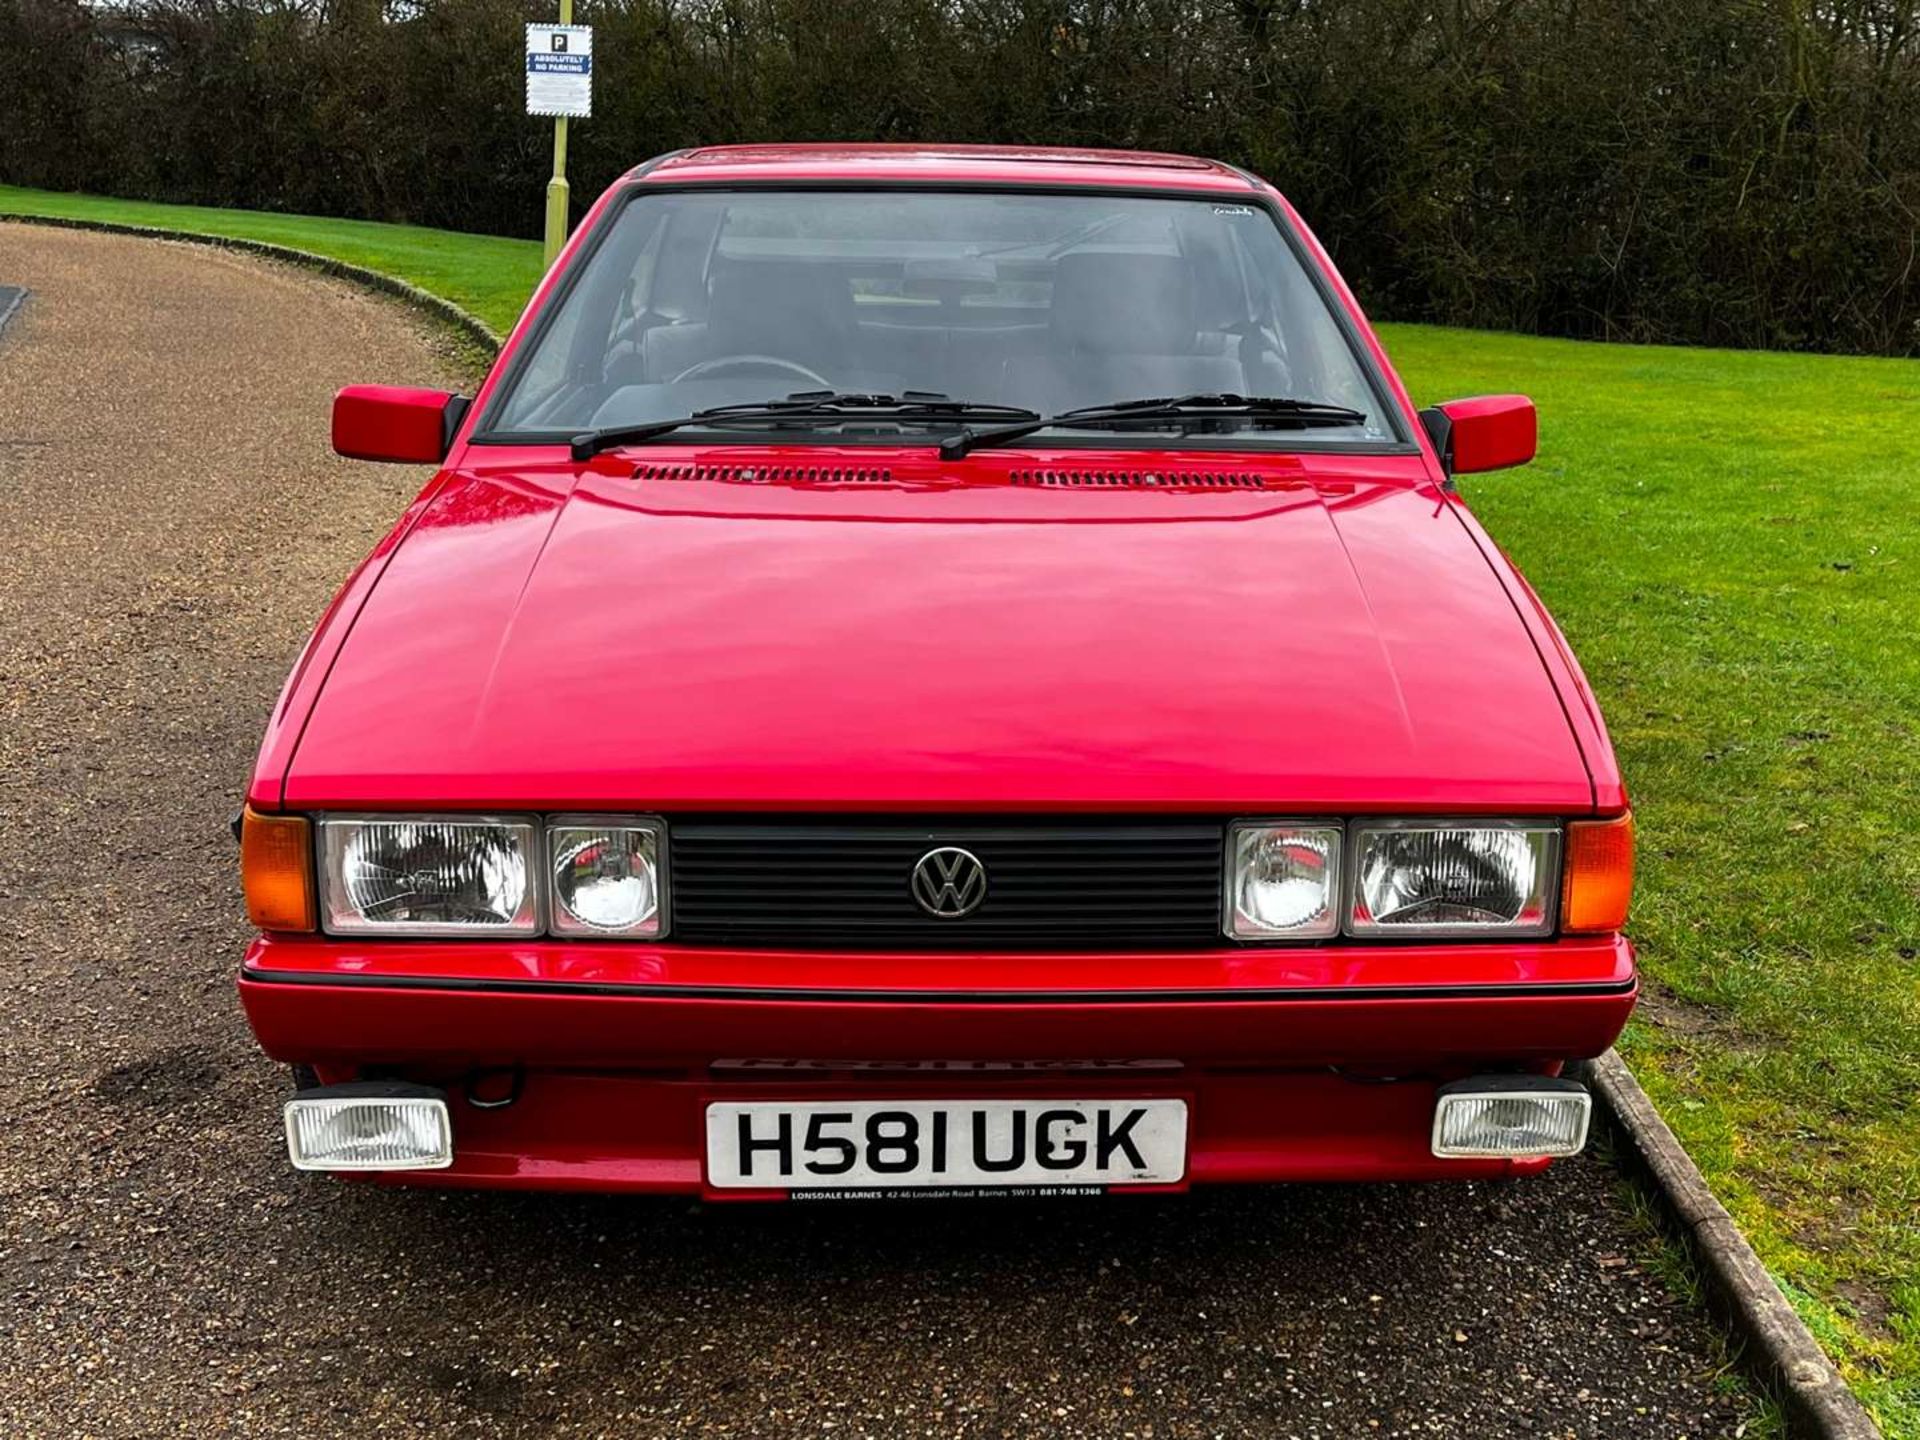 1990 VW SCIROCCO 1.8 GT - Image 2 of 29